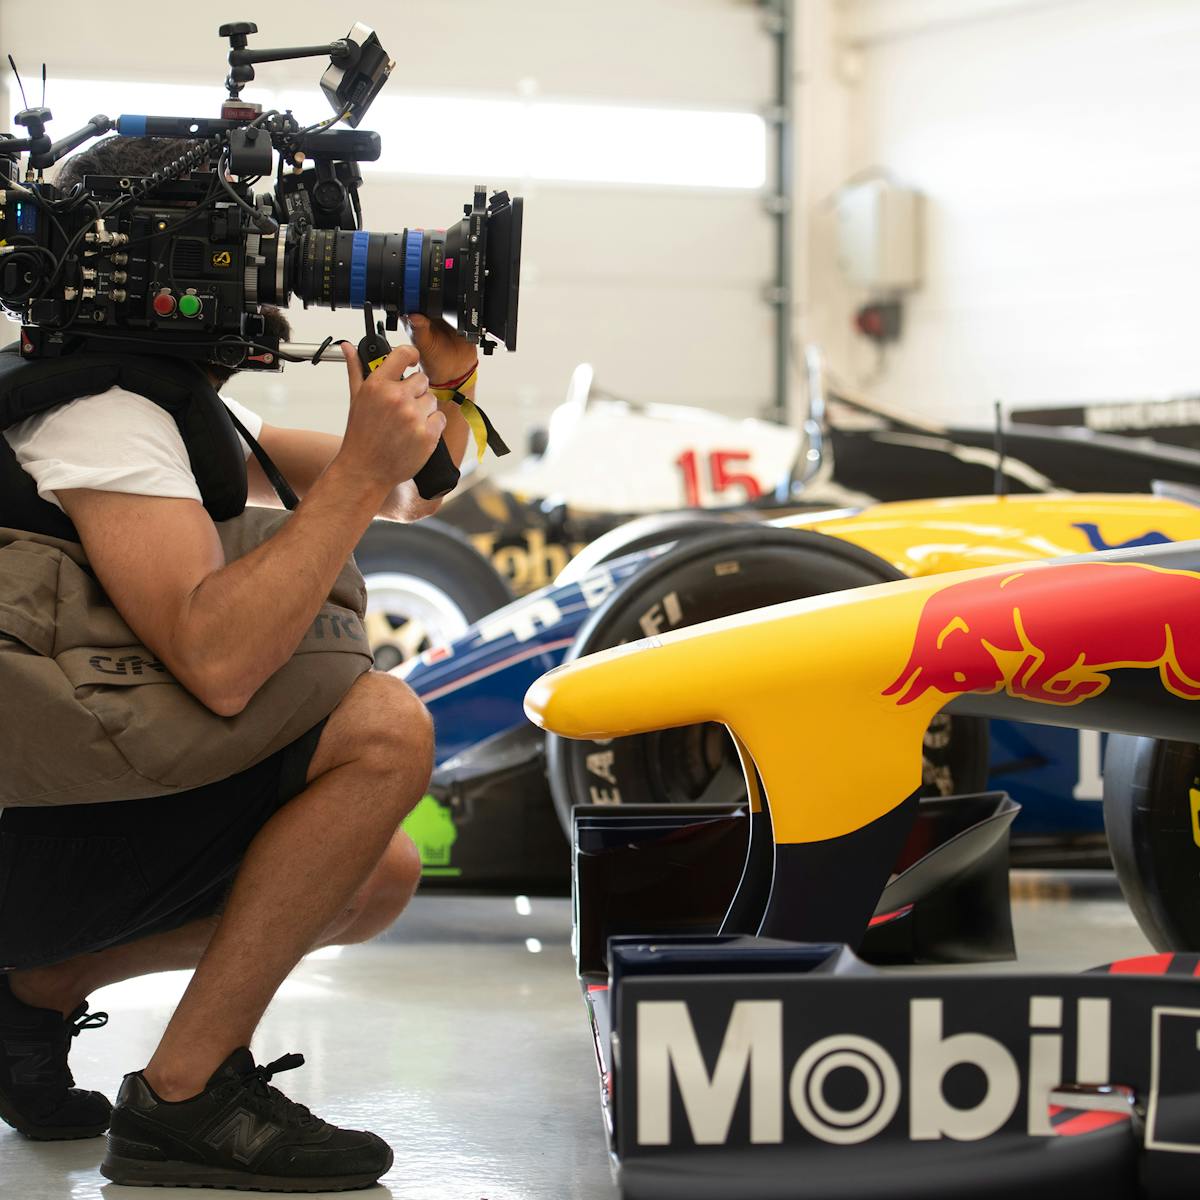 Behind the scenes of Formula 1: Drive to Survive. A person holding a camera crouches next to a yellow, red, and black car with Mobil 1 on its side.